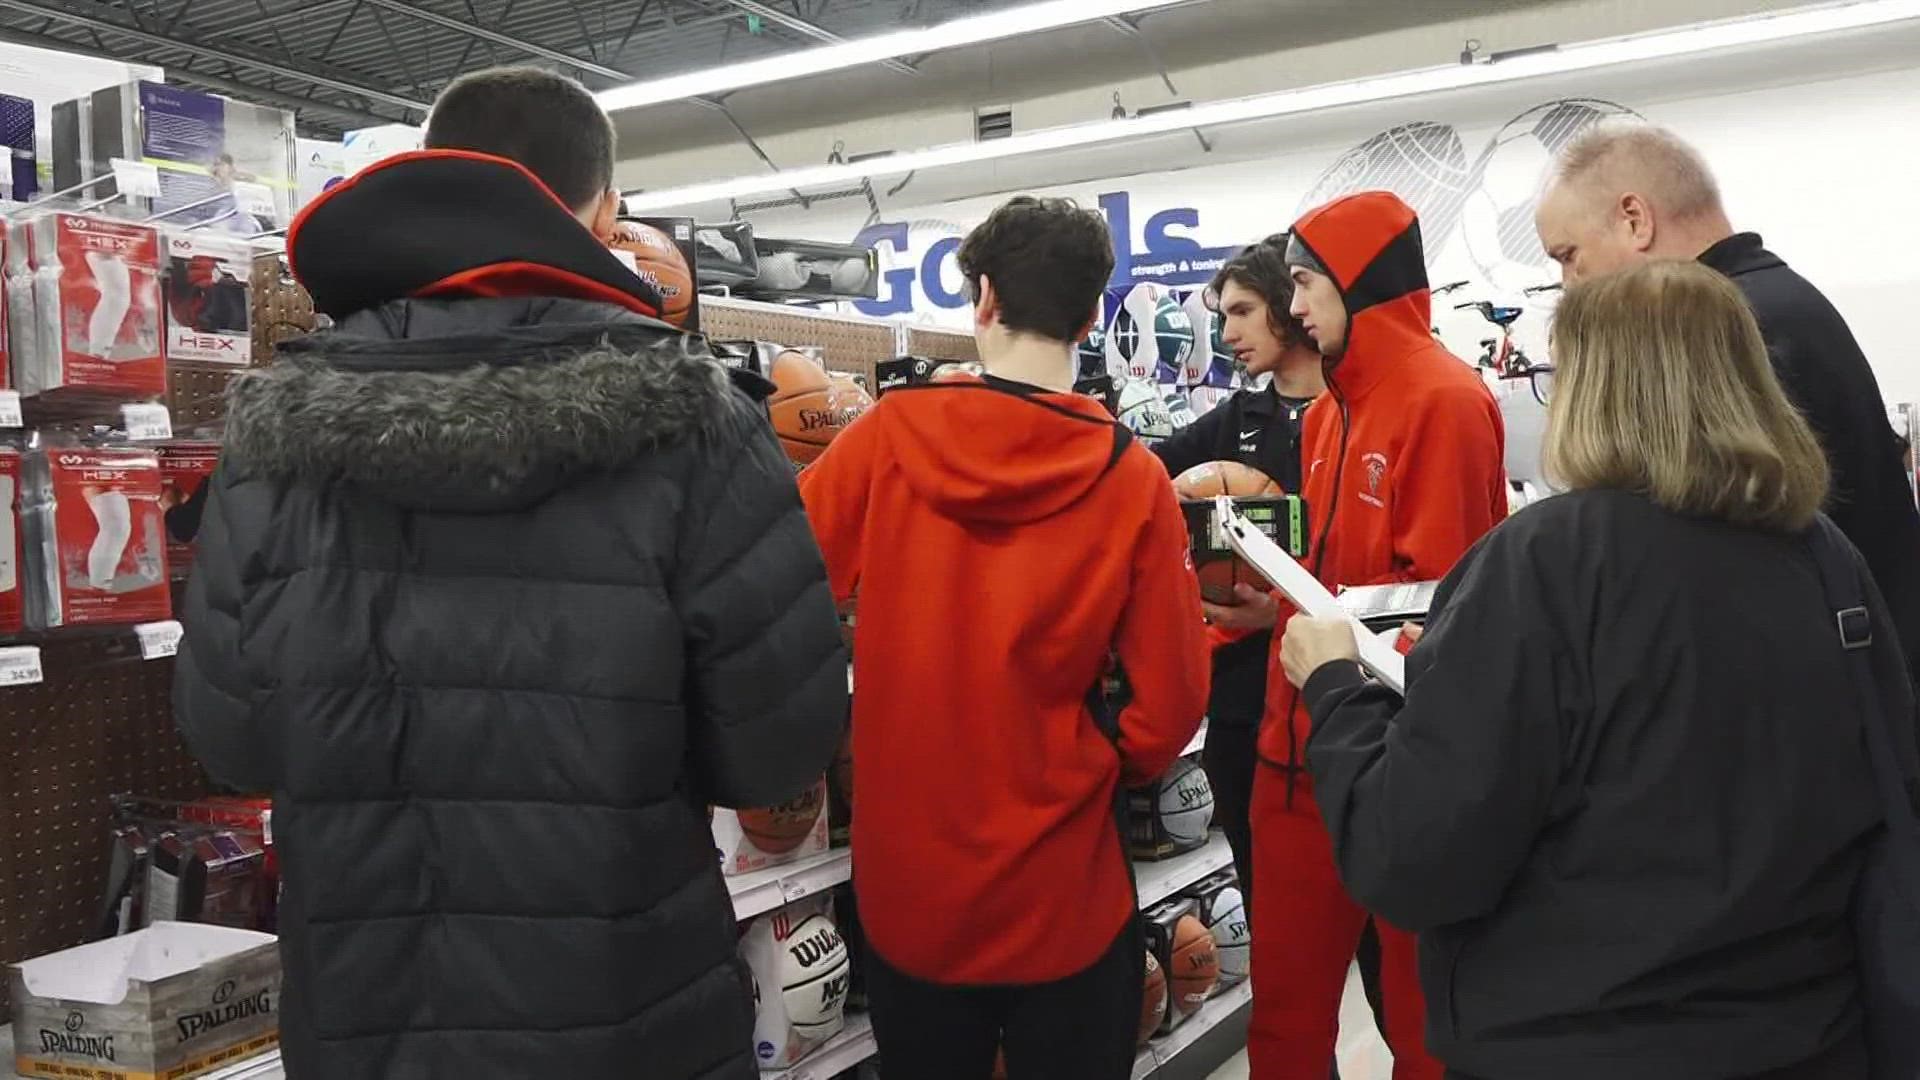 The East Kentwood Boy's Basketball team spent the evening holiday shopping. But not for themselves.